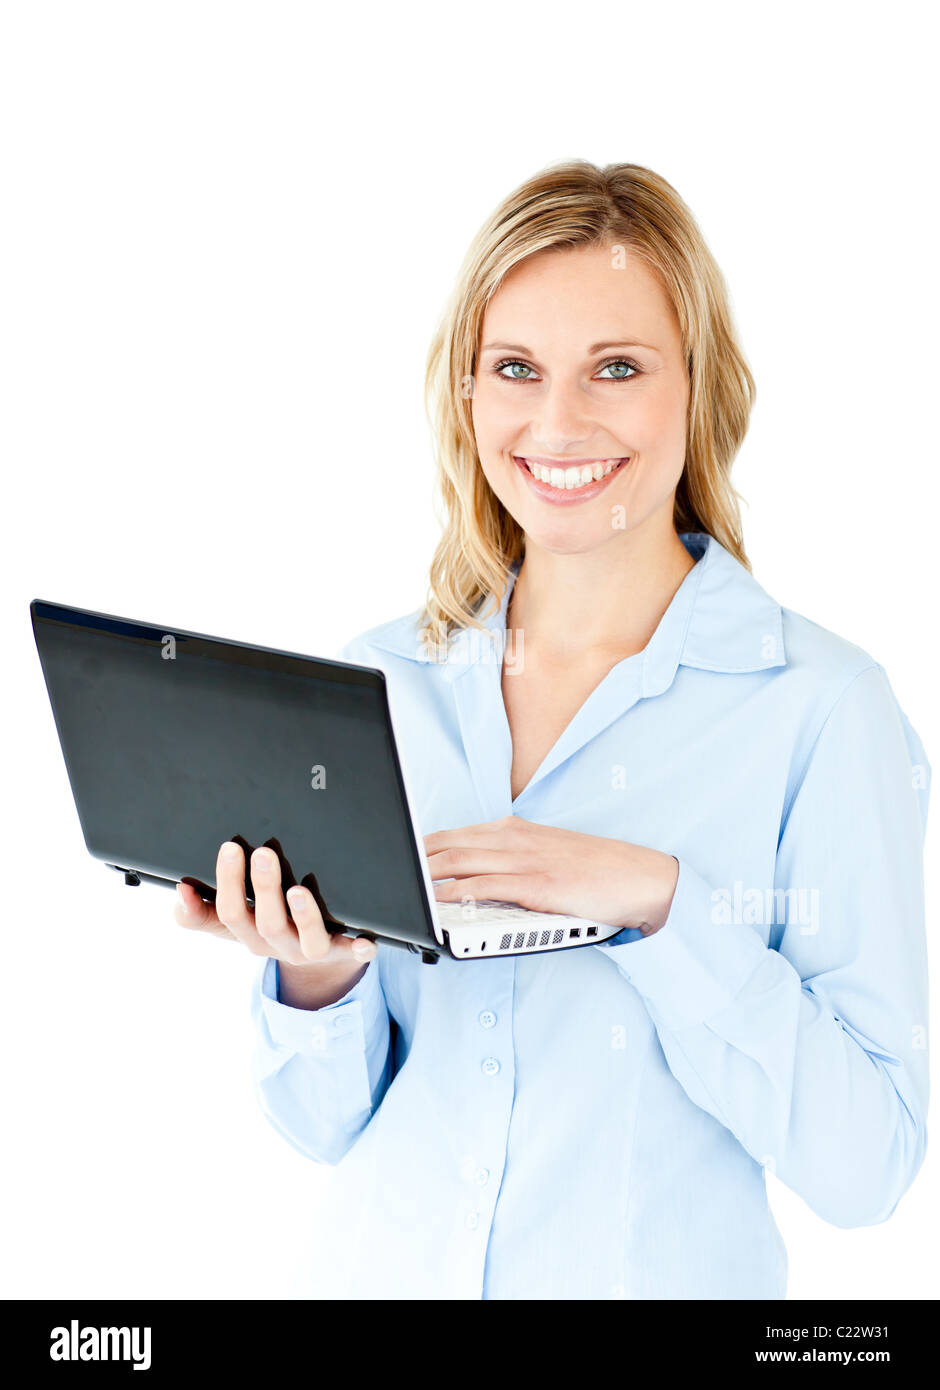 Jolly young businesswoman holding a laptop Stock Photo